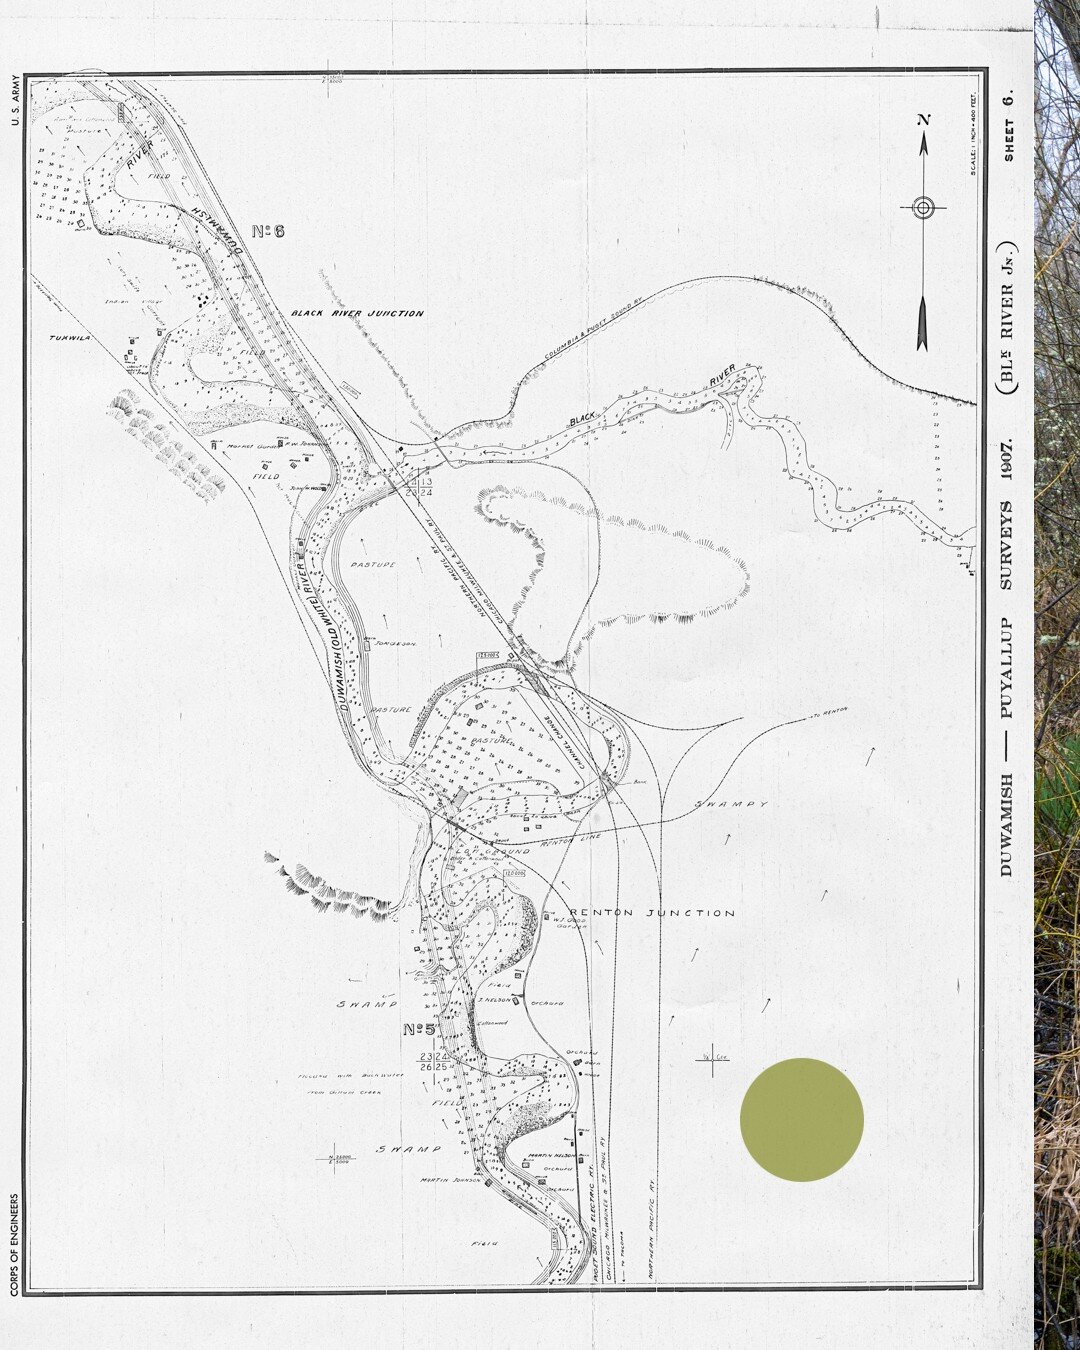 The Springbrook Creek Wetland and Habitat Mitigation Bank traded credits for acres of developed land. The Unit A boardwalk offers a surprisingly pleasant stroll through a sprawling, retained wetland in south Renton. This drainage and runoff network f